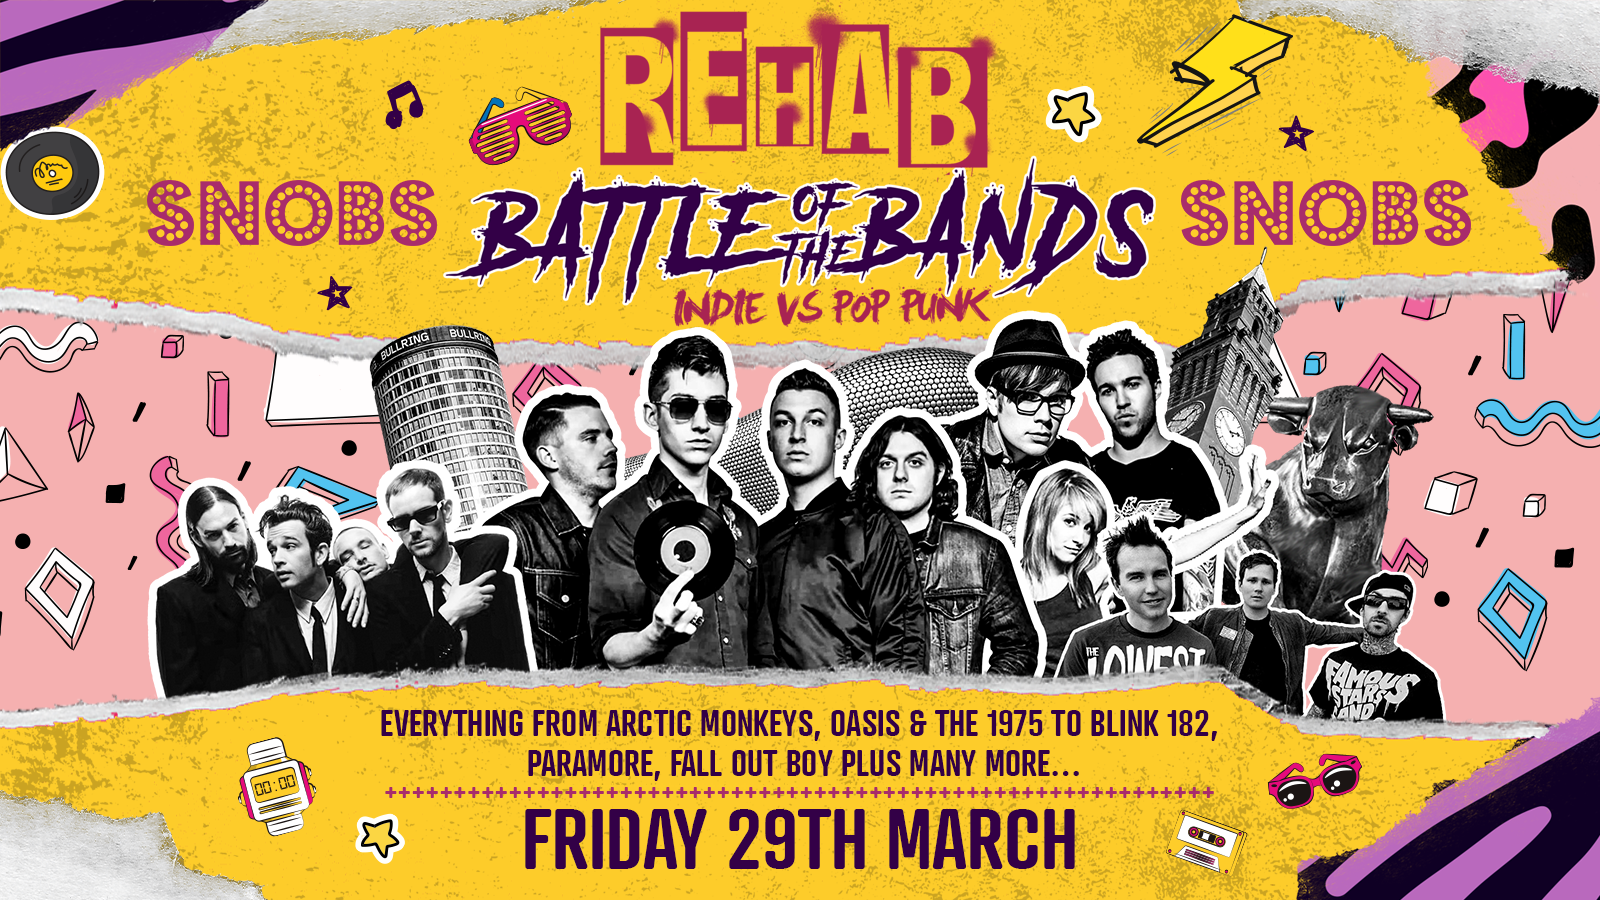 Rehab Fridays [TONIGHT] Battle of the Bands⚡️INDIE VS PUNK ROCK⚡️ 29th March